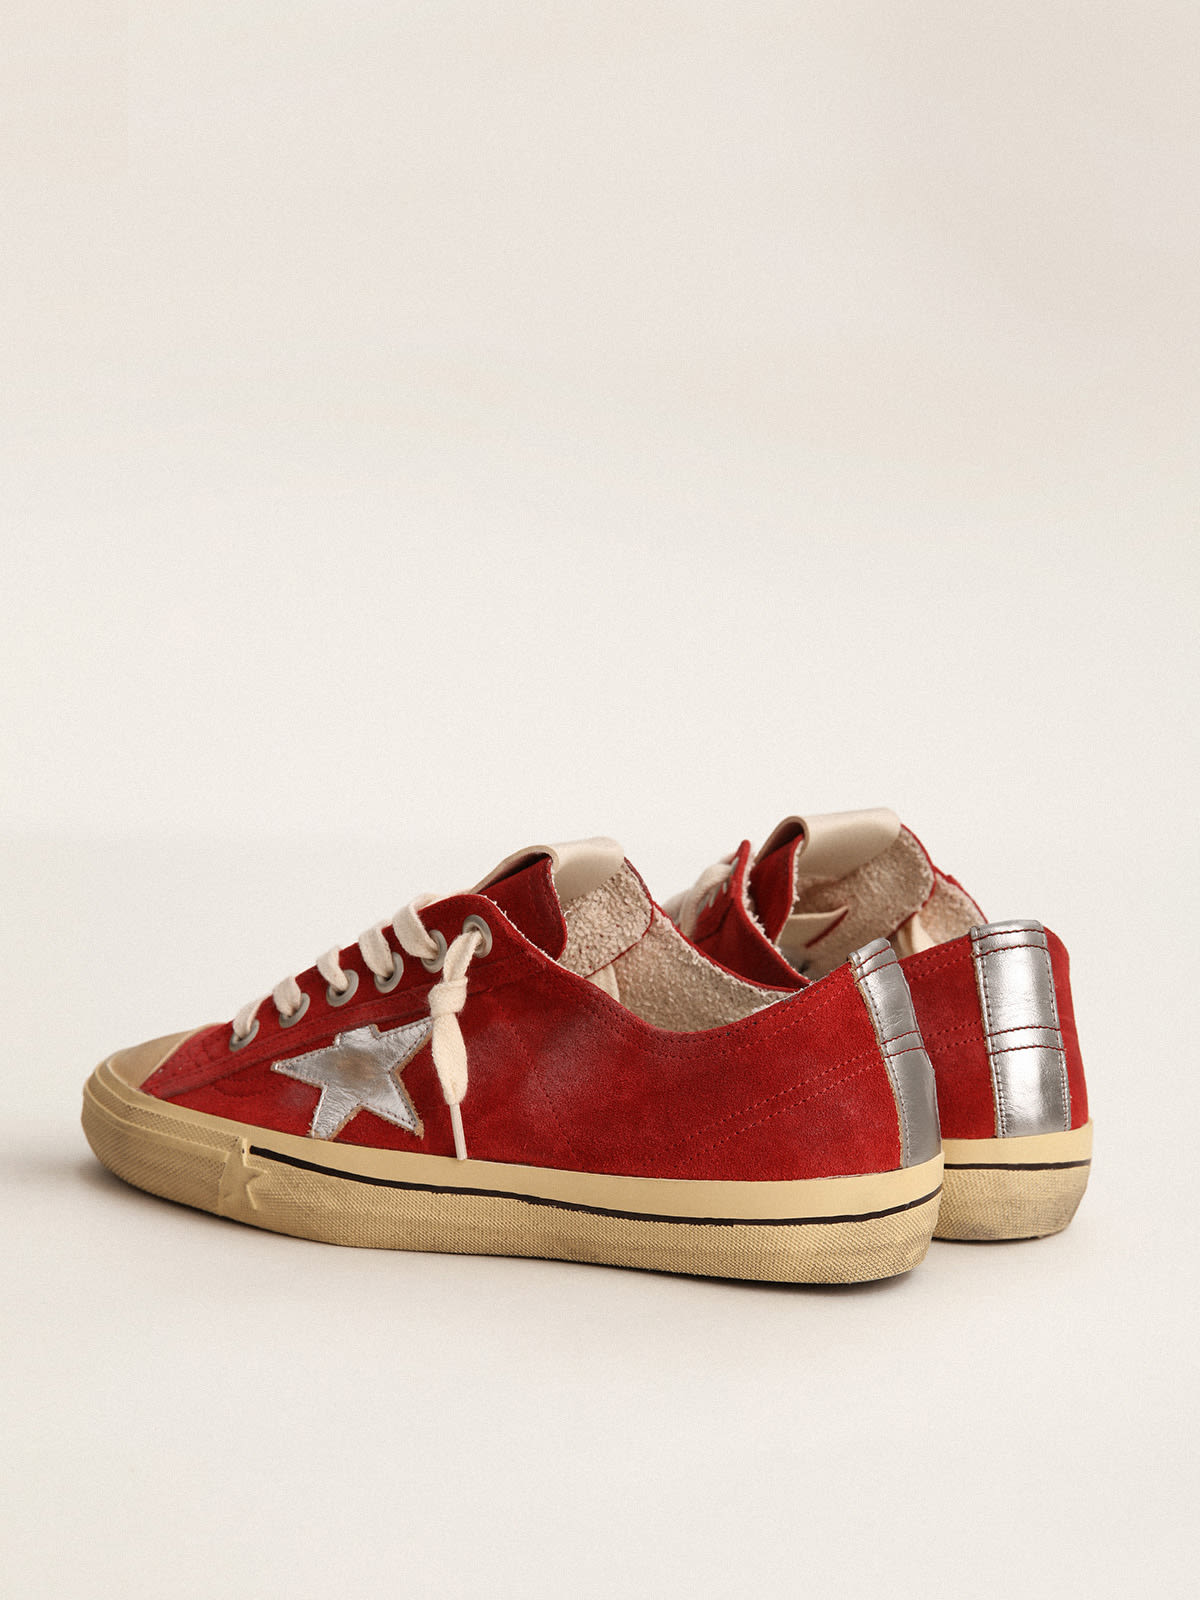 Golden Goose - Men's V-Star LTD in dark red suede with silver star and heel tab in 